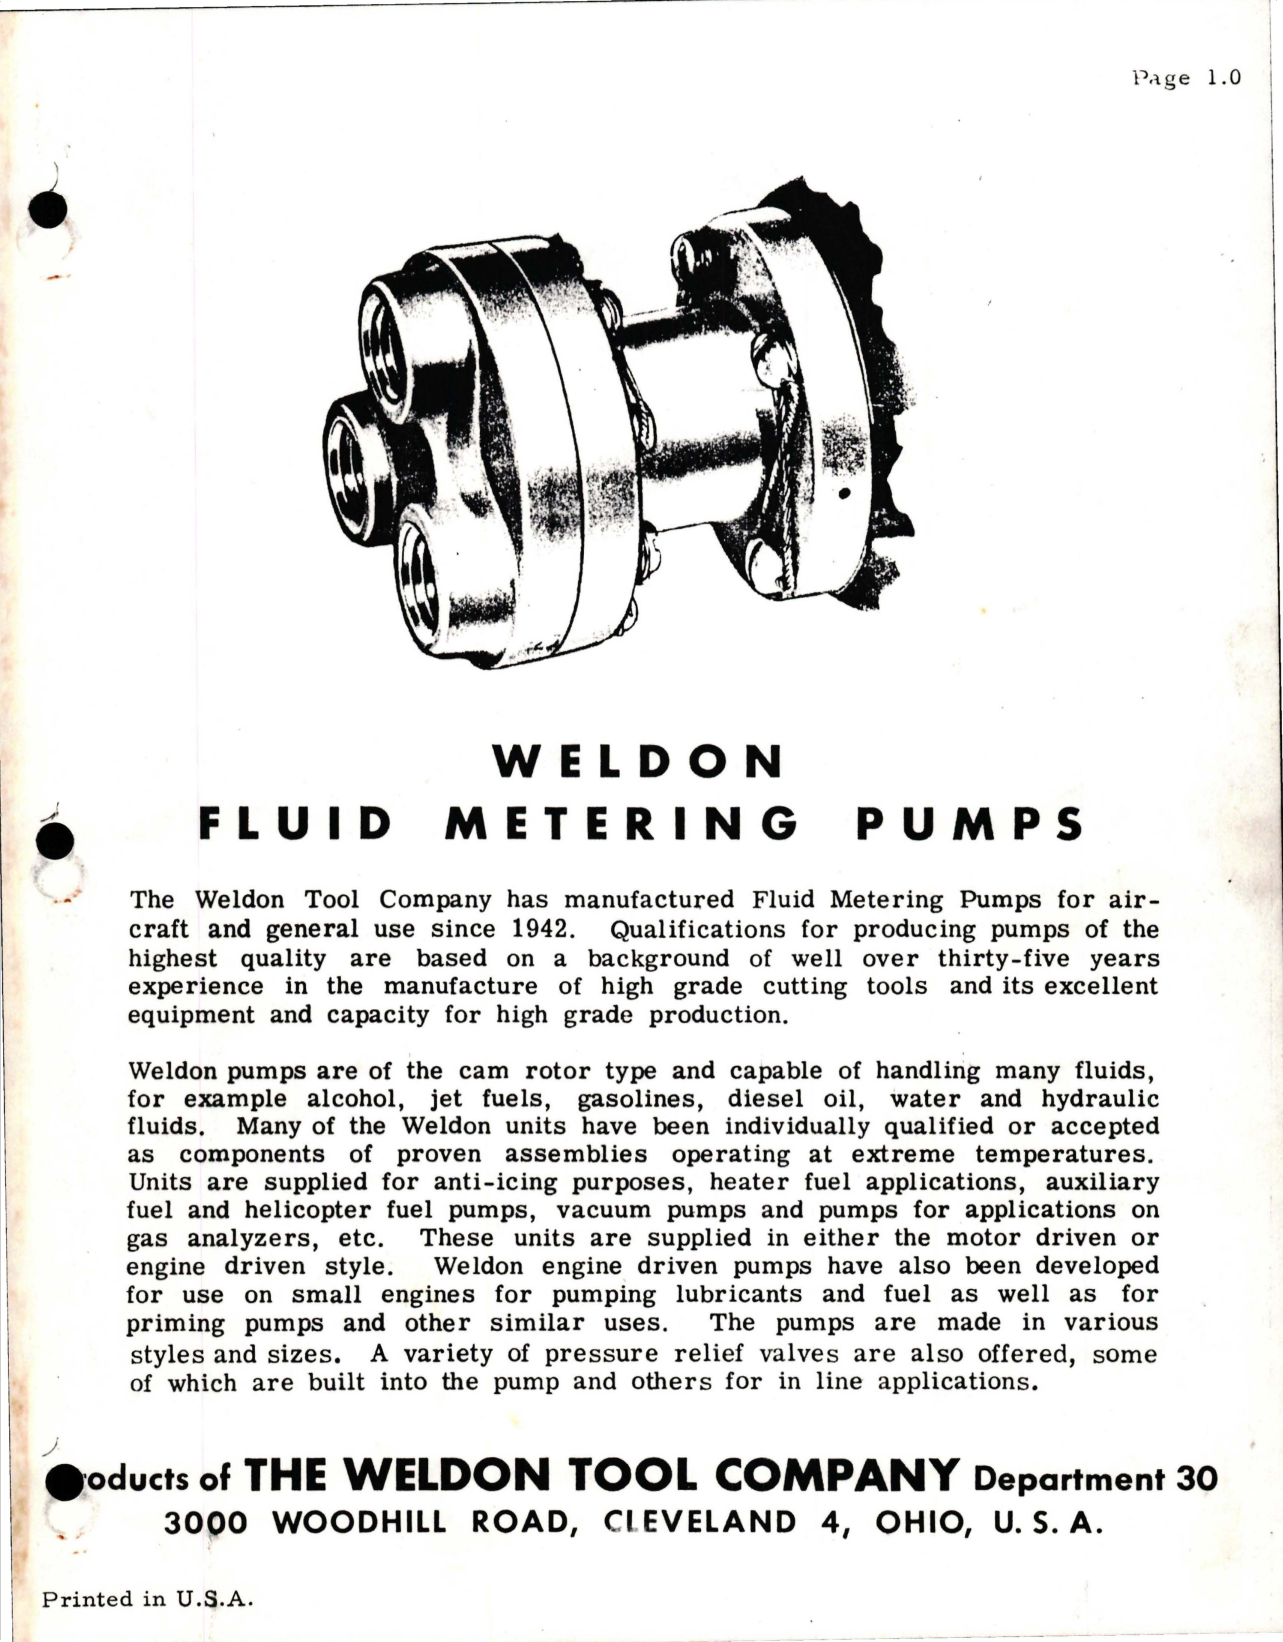 Sample page 1 from AirCorps Library document: Weldon Fluid Metering Pumps - Model C4033